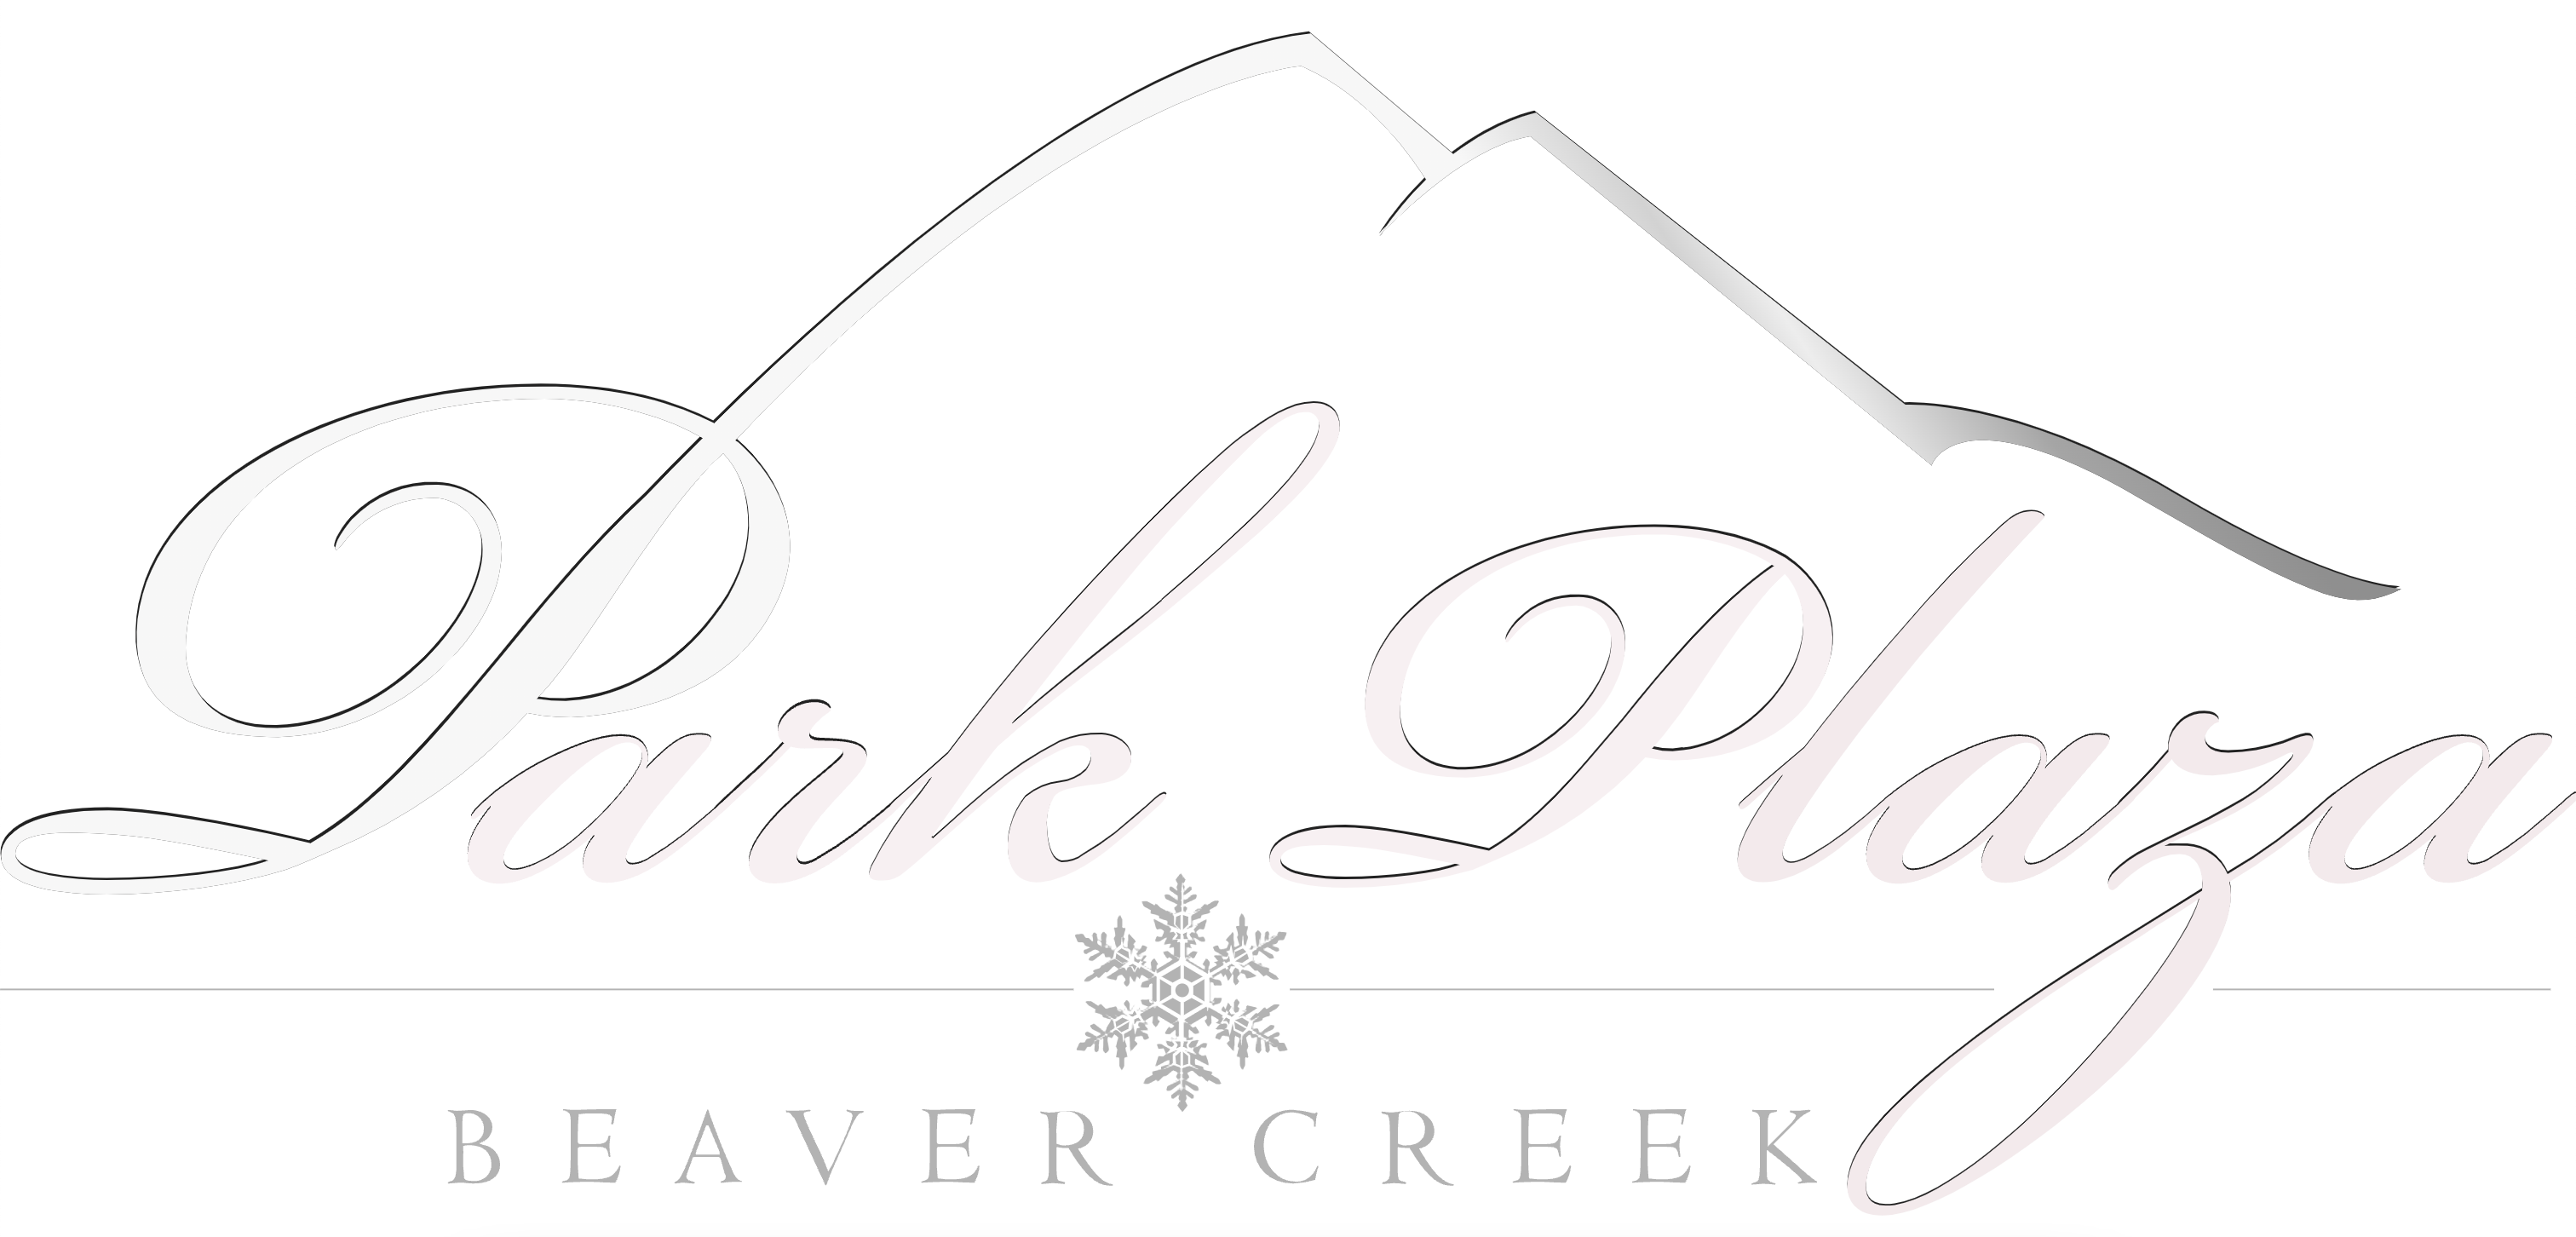 Park Plaza Beaver Creek partnering with THIRDHOME